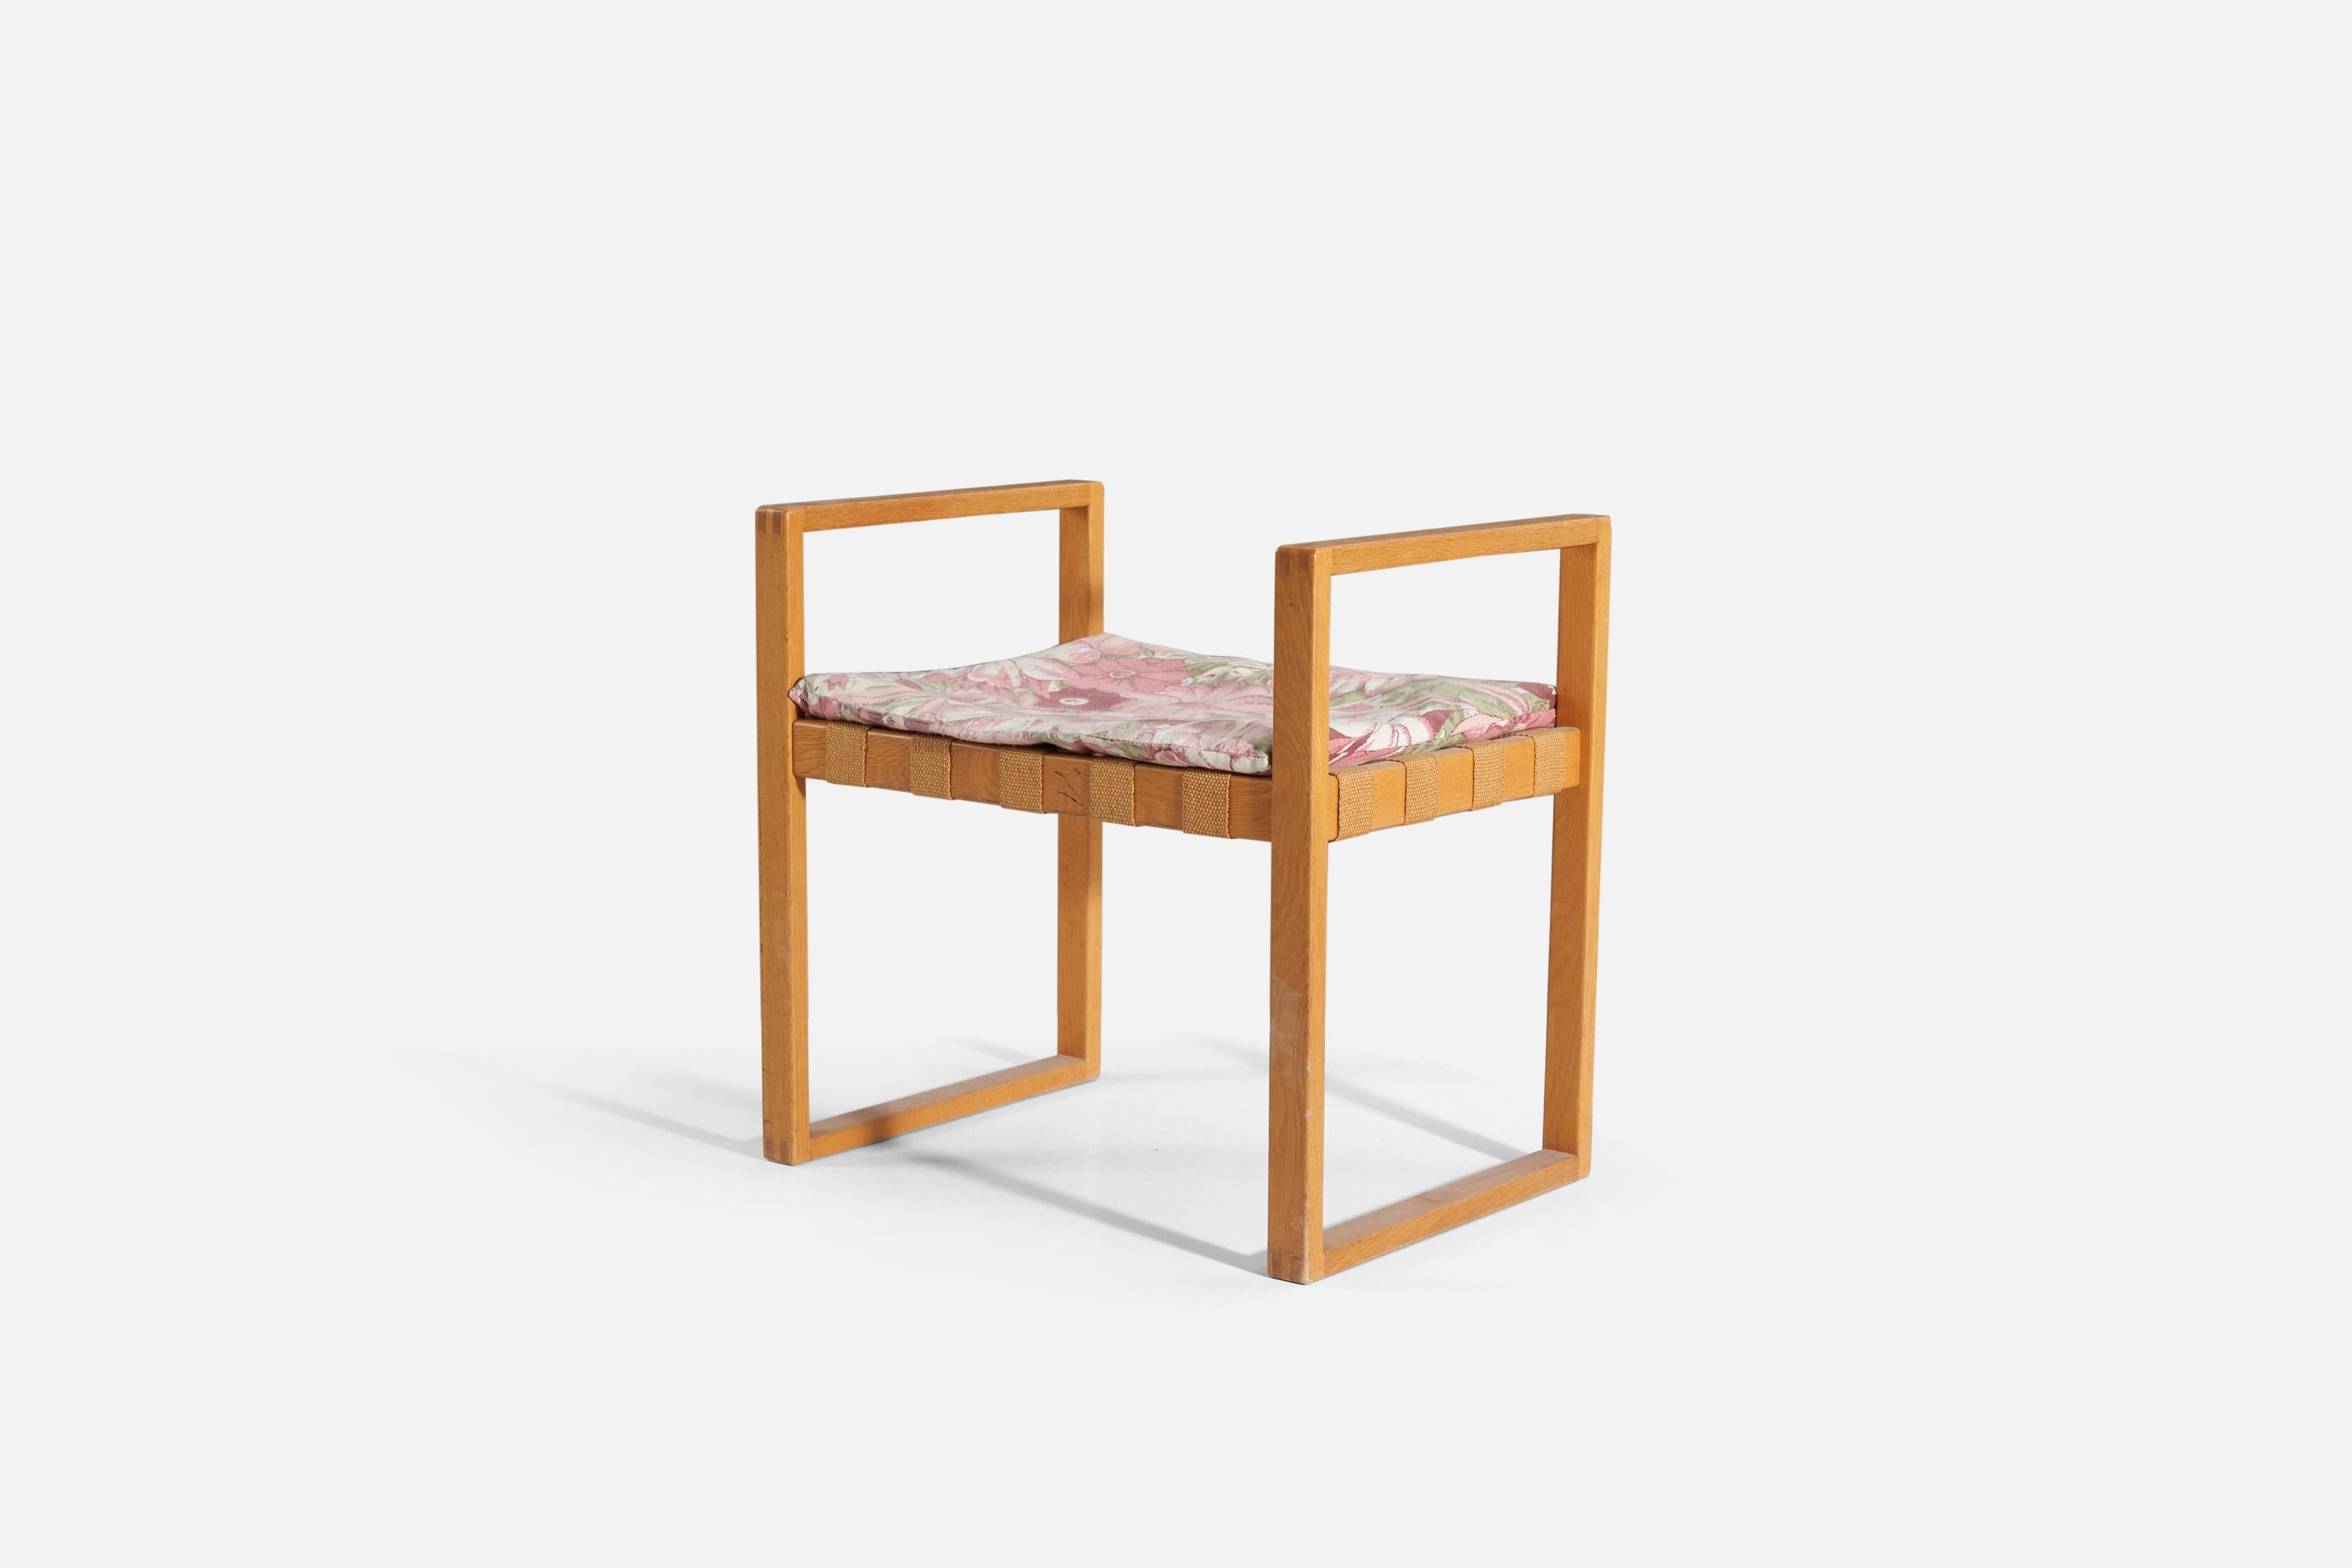 A wood, fabric, and webbing stool, produced by a Swedish designer, Sweden, c. 1960s.